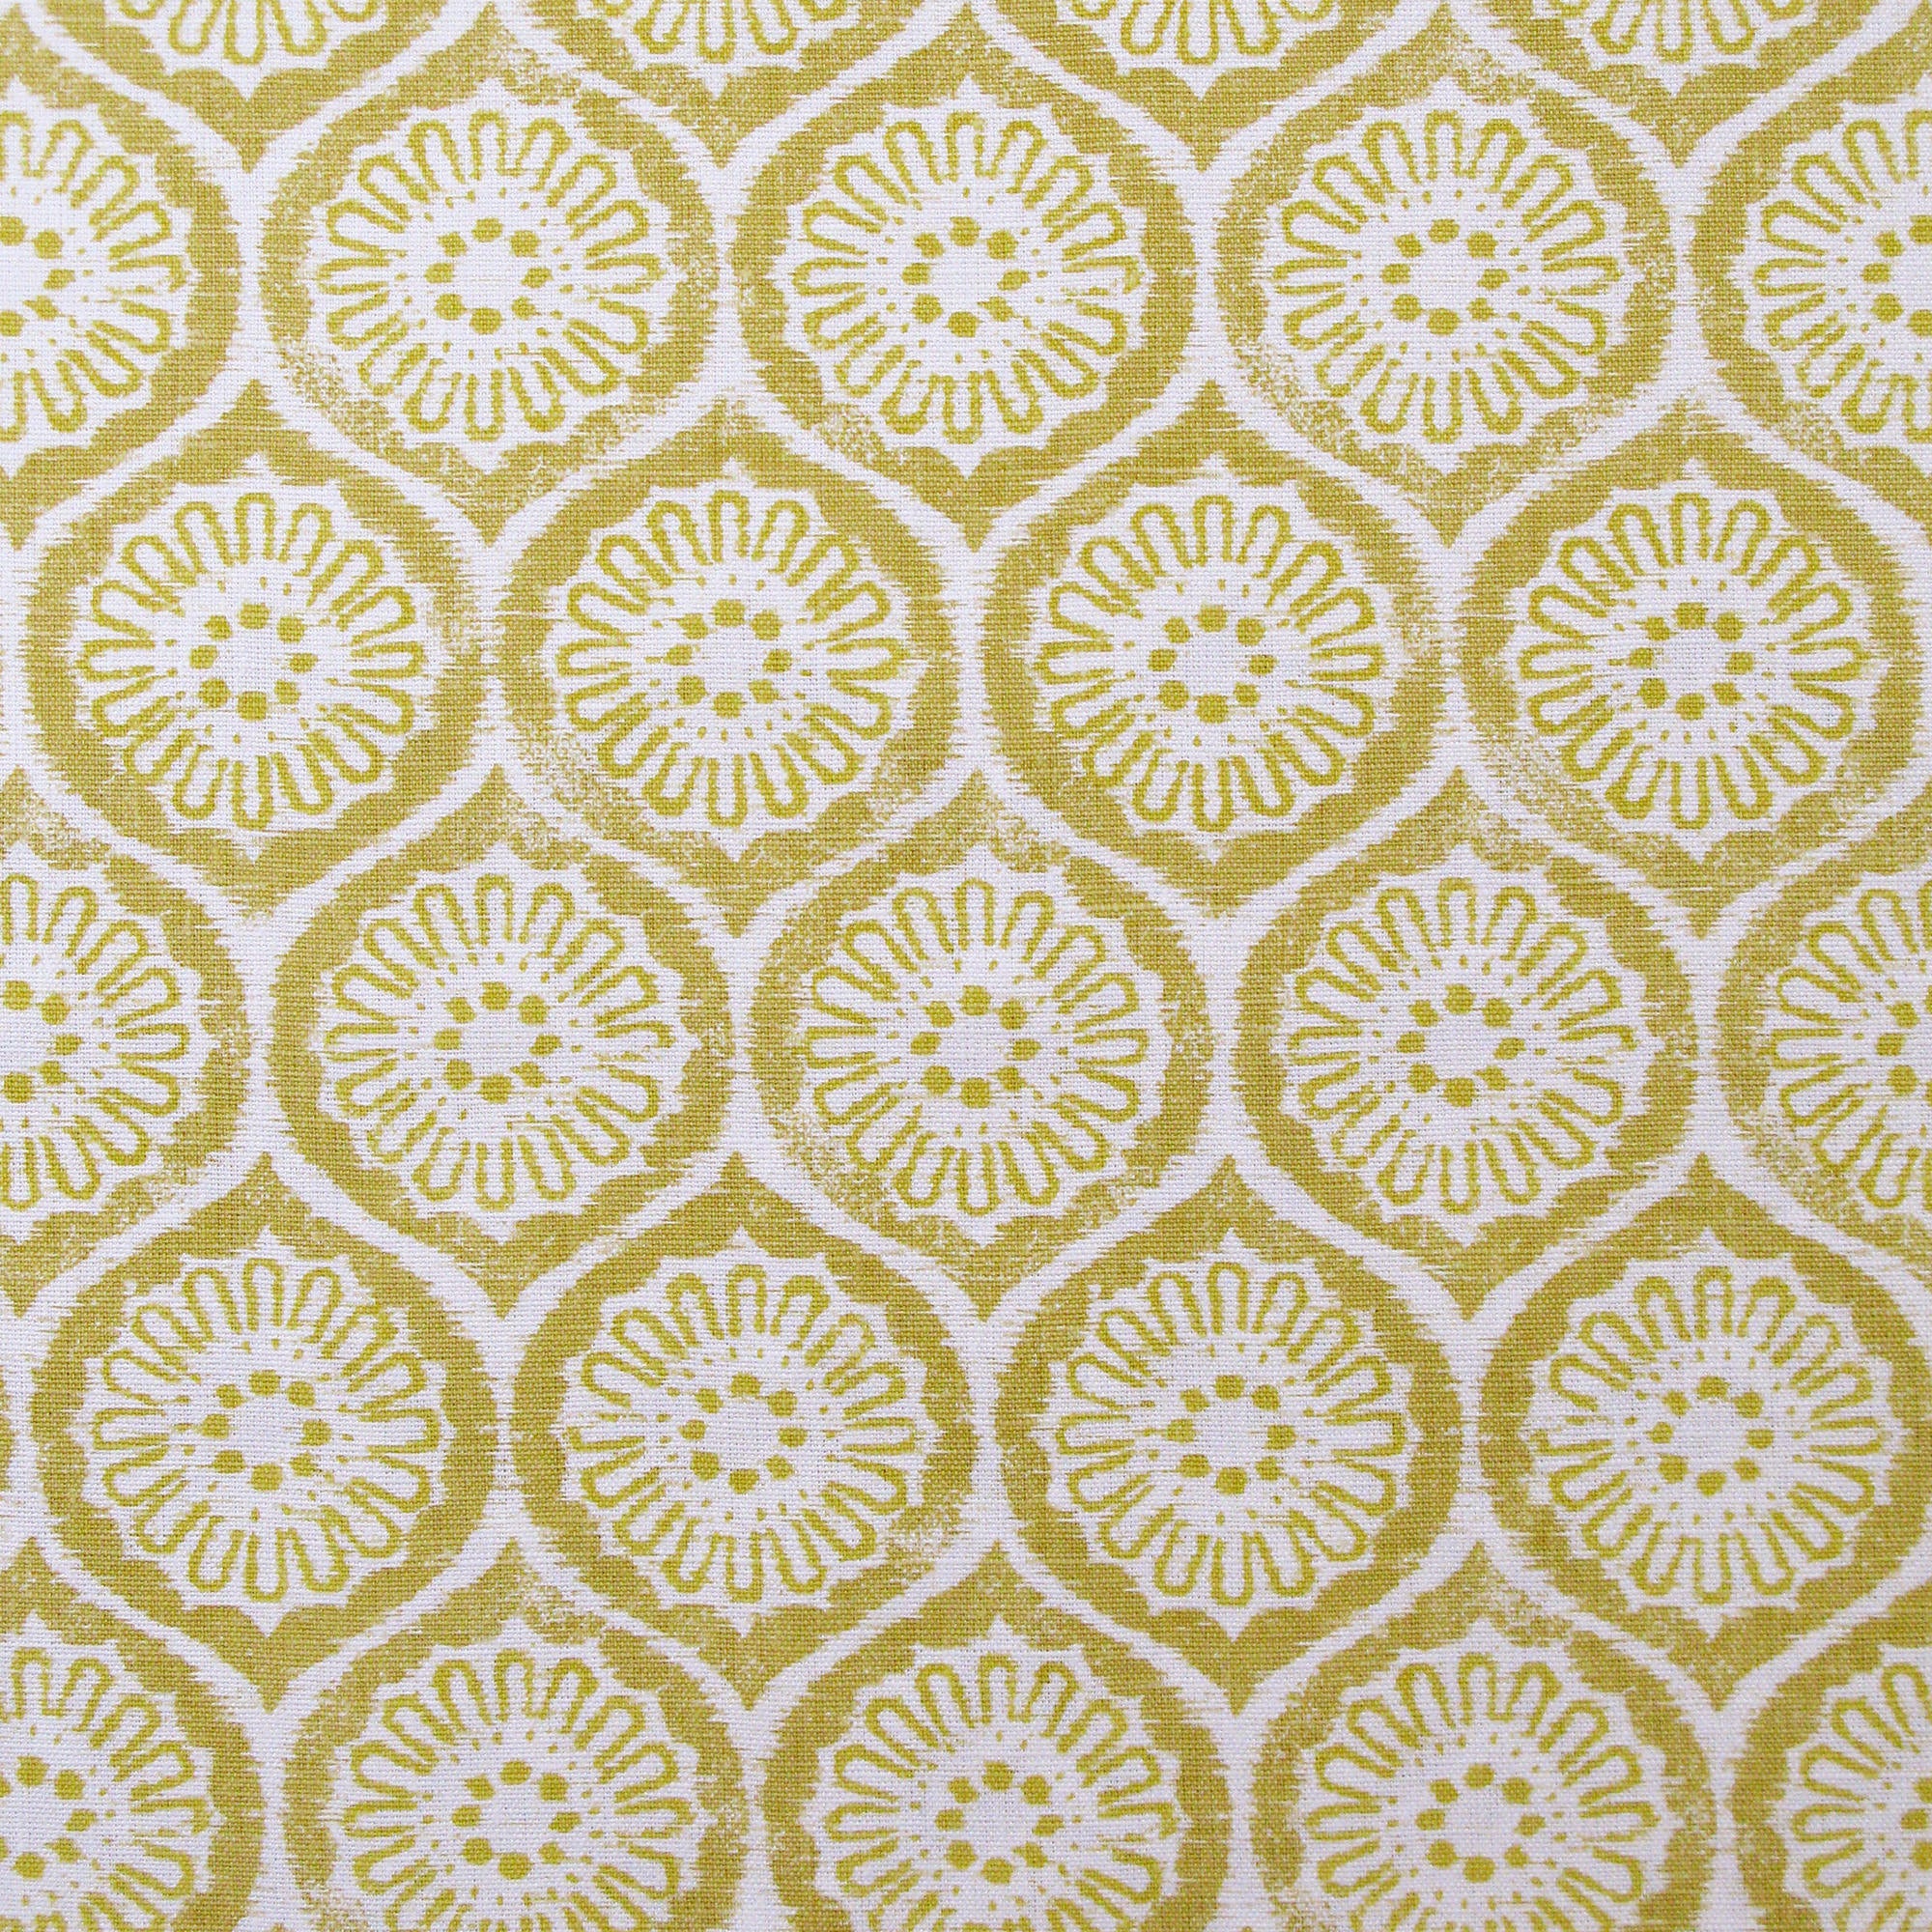 Detail of fabric in a floral lattice print in yellow on a cream field.